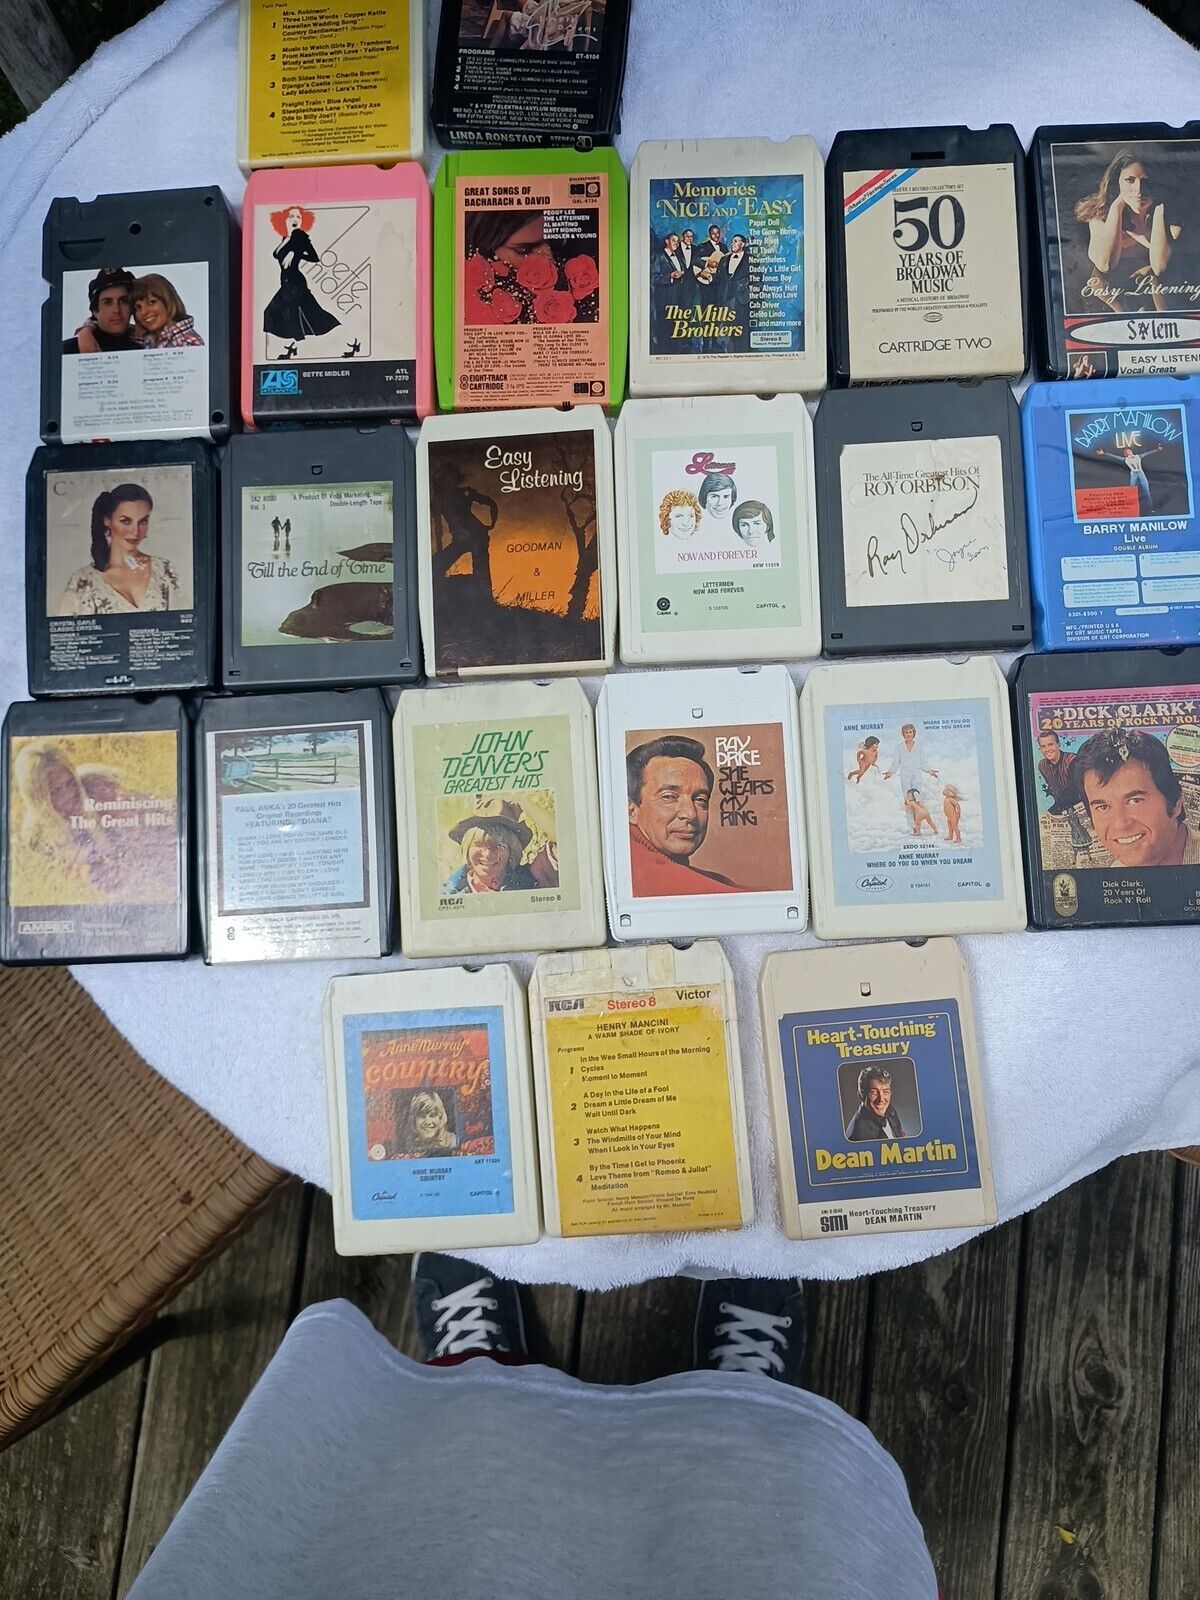 vintage 8 track tapes lot Of 23, Manilow, Orbison, Murray, Untested All Pict Inc